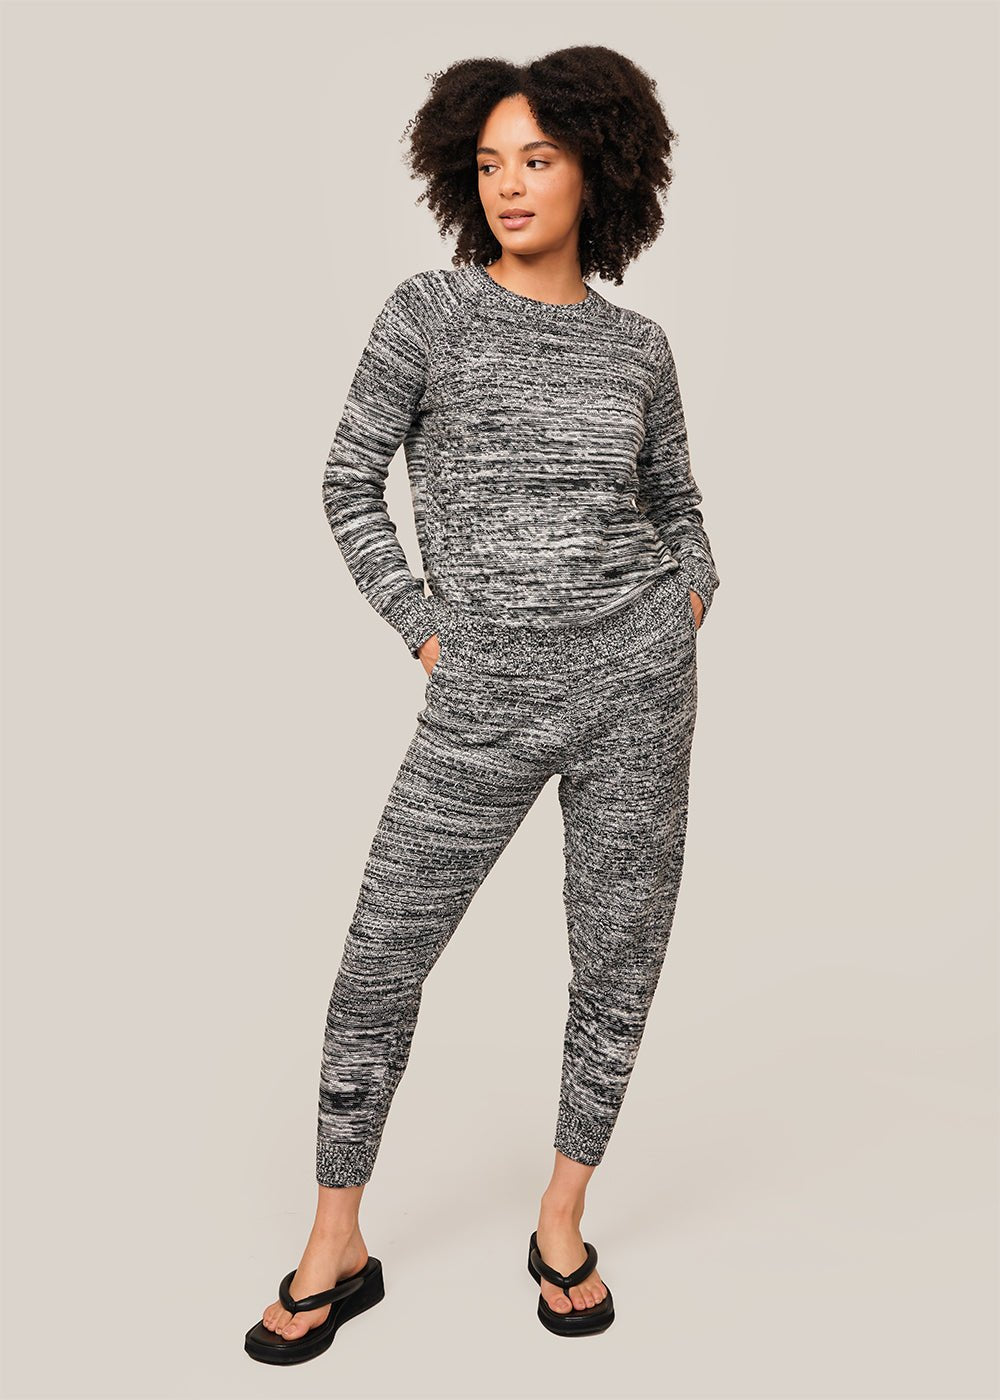 Giu Giu White Noise Space Suit Sweater - New Classics Studios Sustainable Ethical Fashion Canada